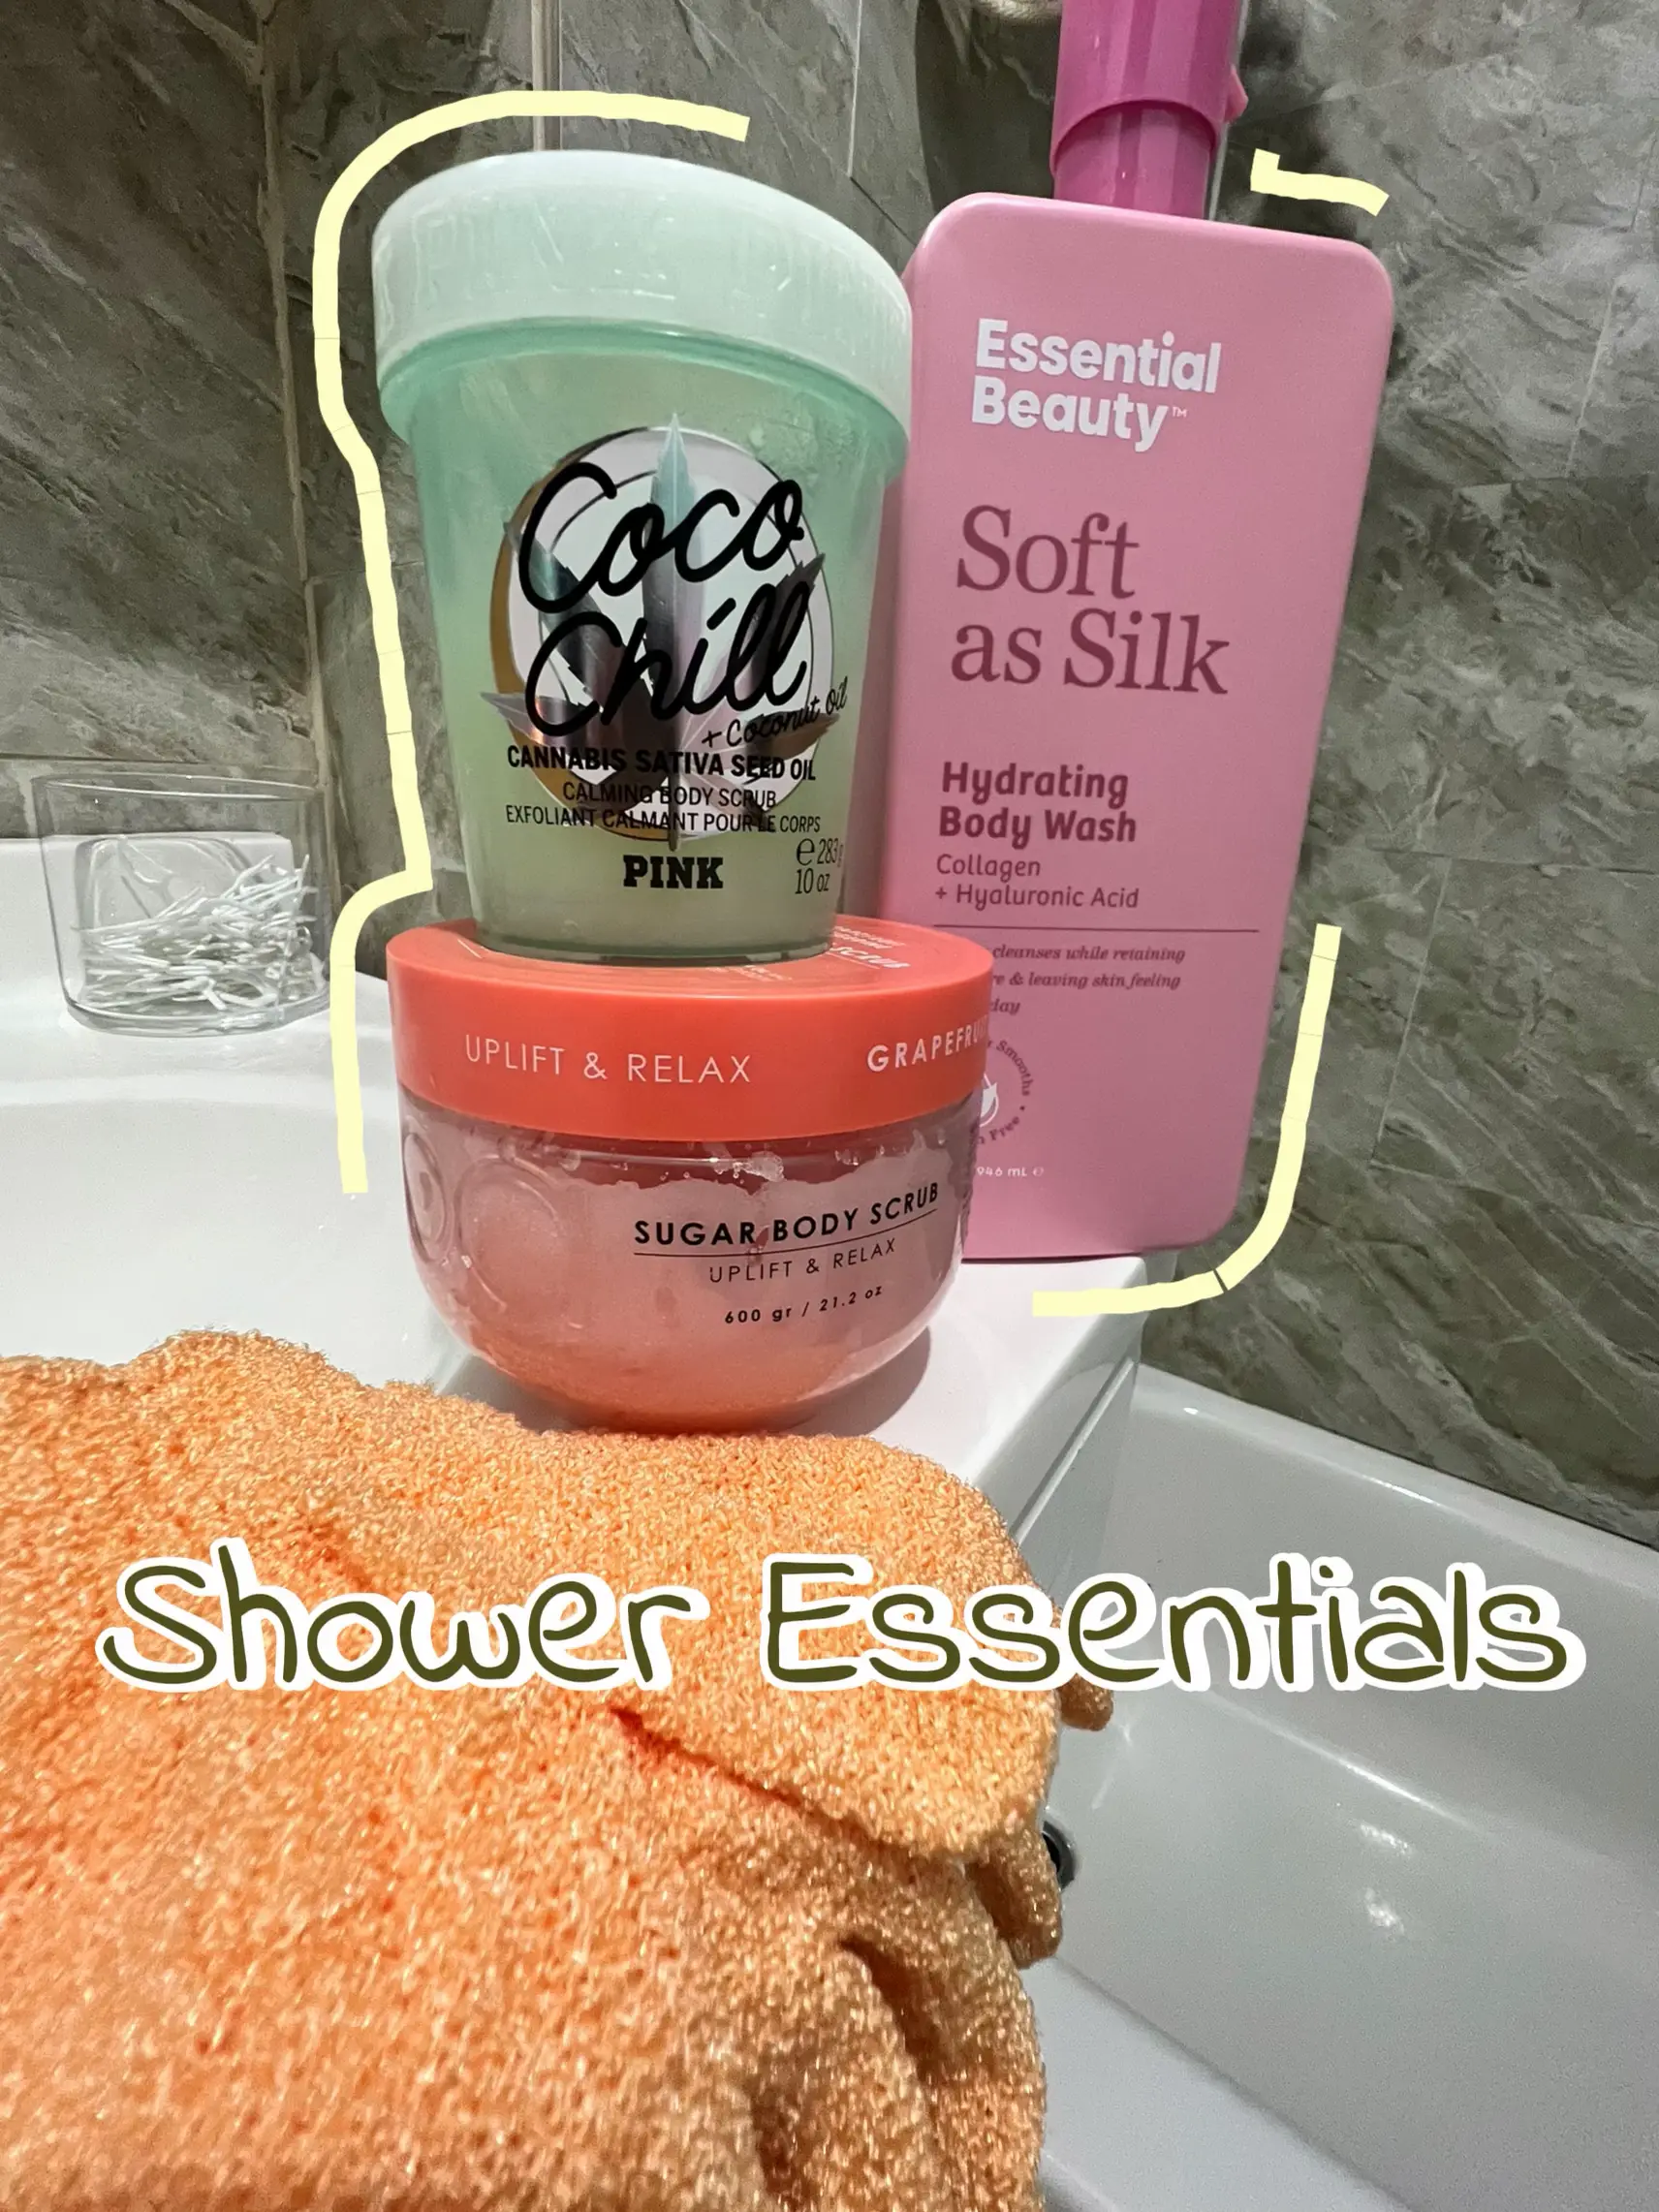 My Summer Shower Must Haves !, Gallery posted by Lyssa606